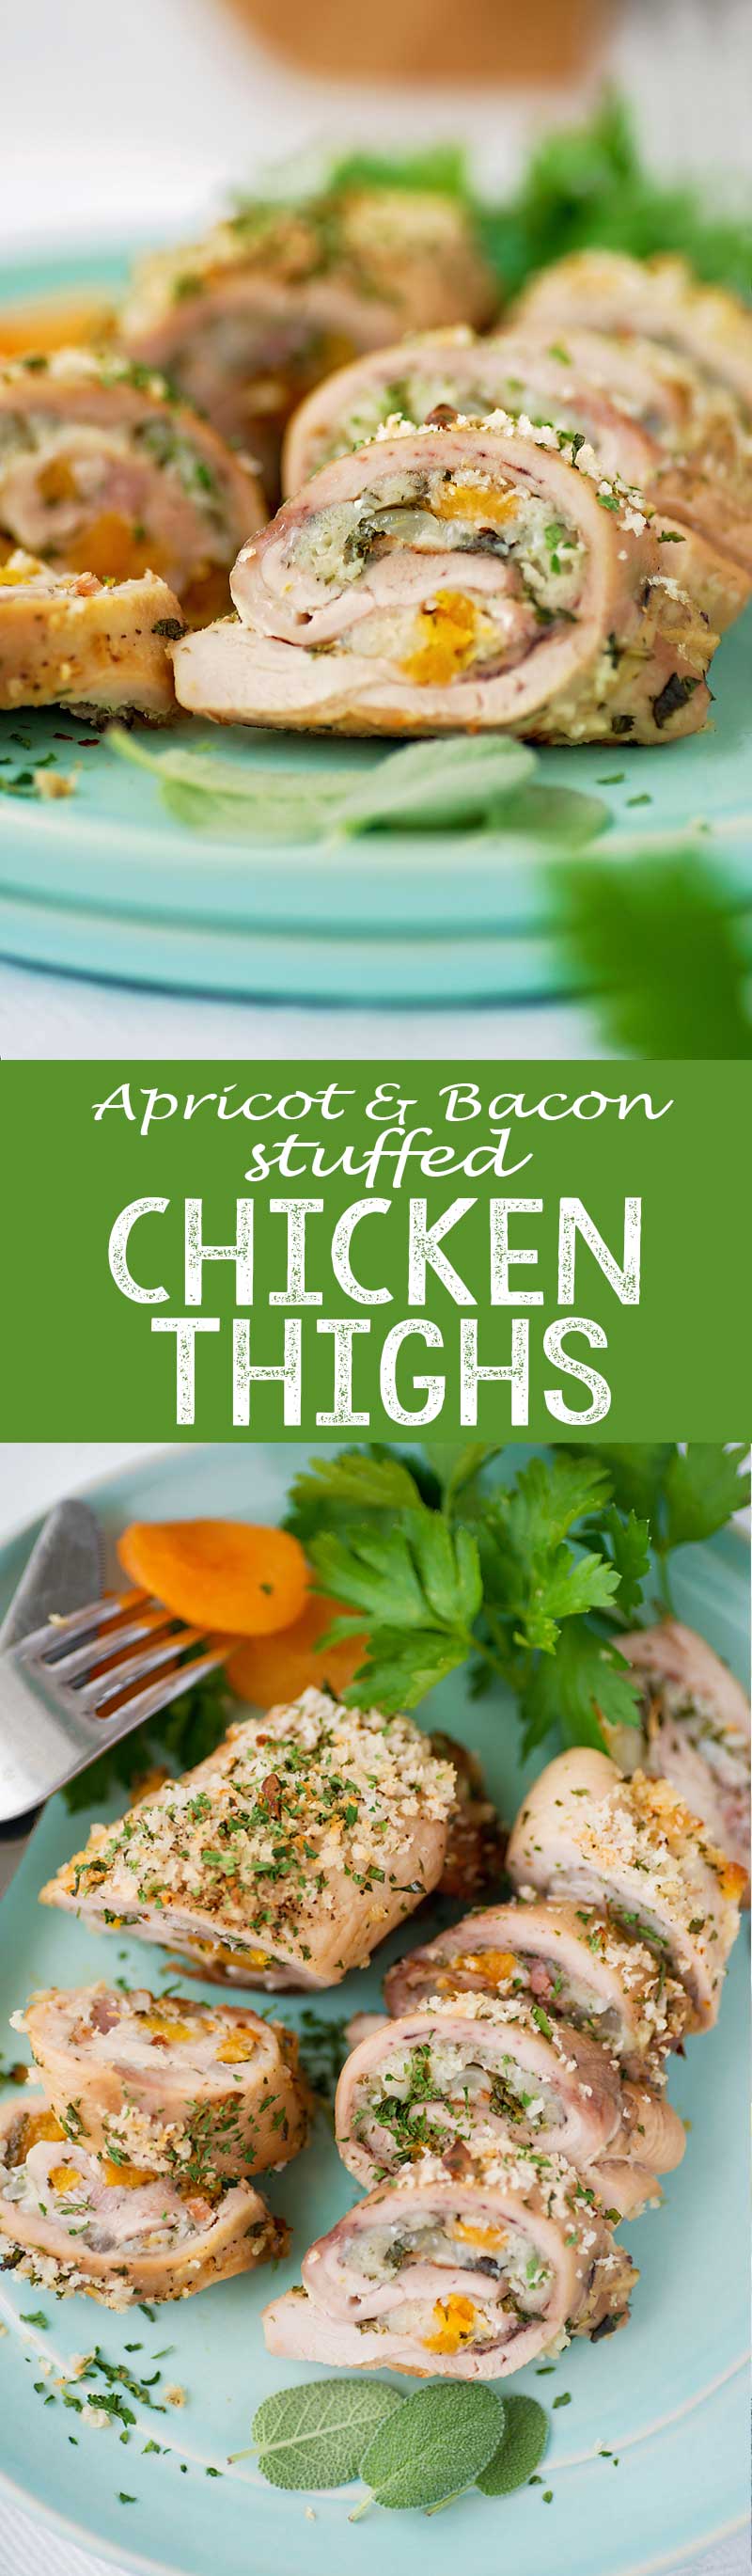 Apricot and Bacon stuffed chicken thighs